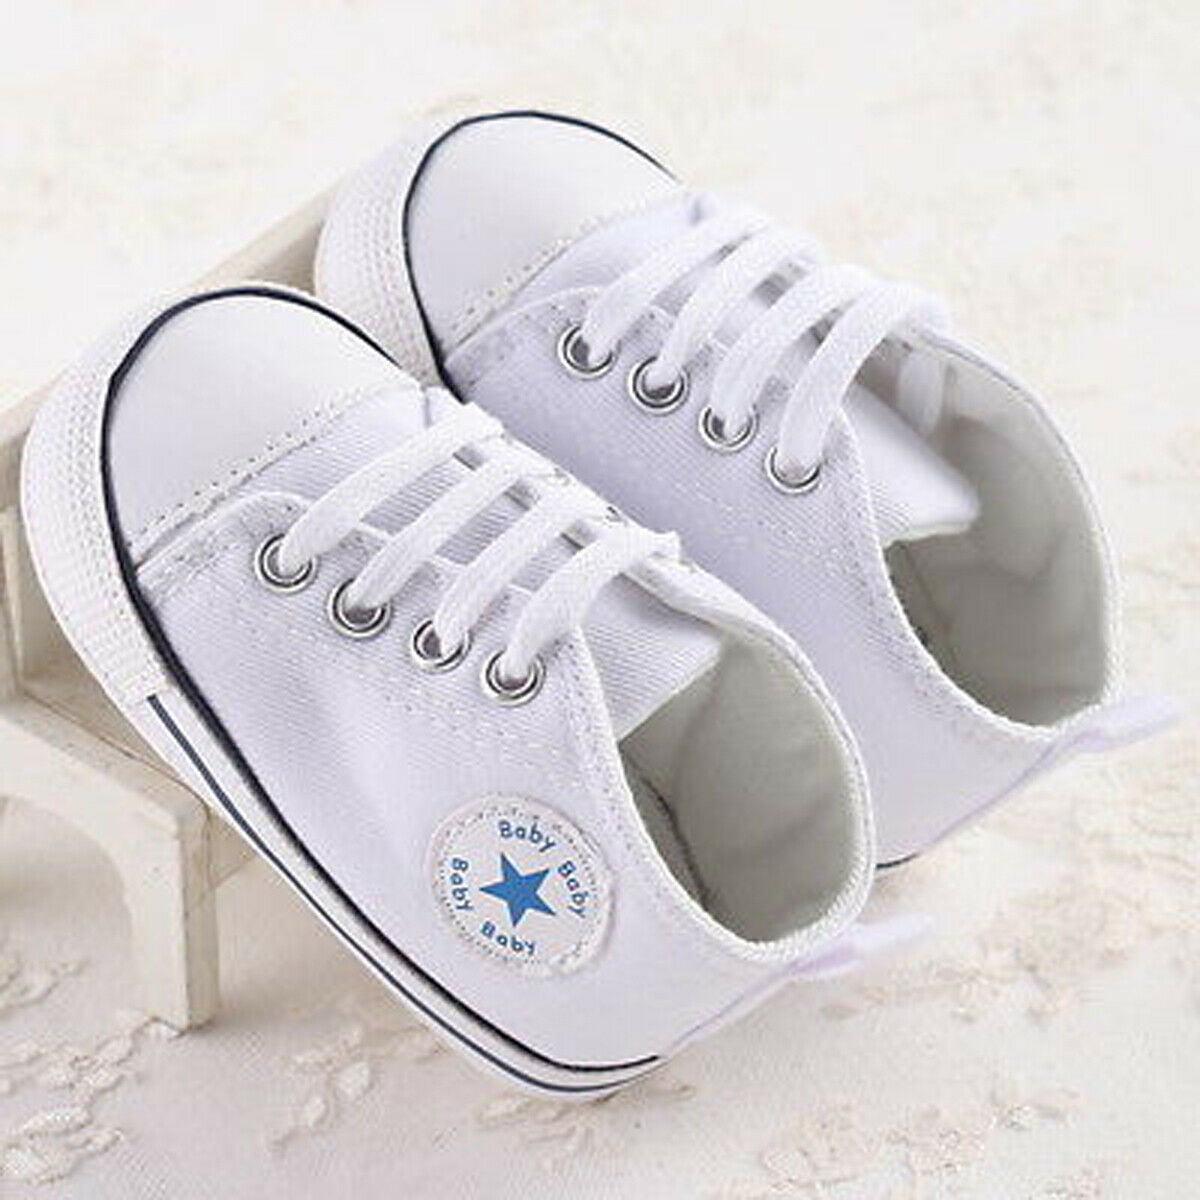 Toddler Infant Baby Boy Girl Soft Sole Crib Shoes Sneaker Newborn 0 to 12 Months 